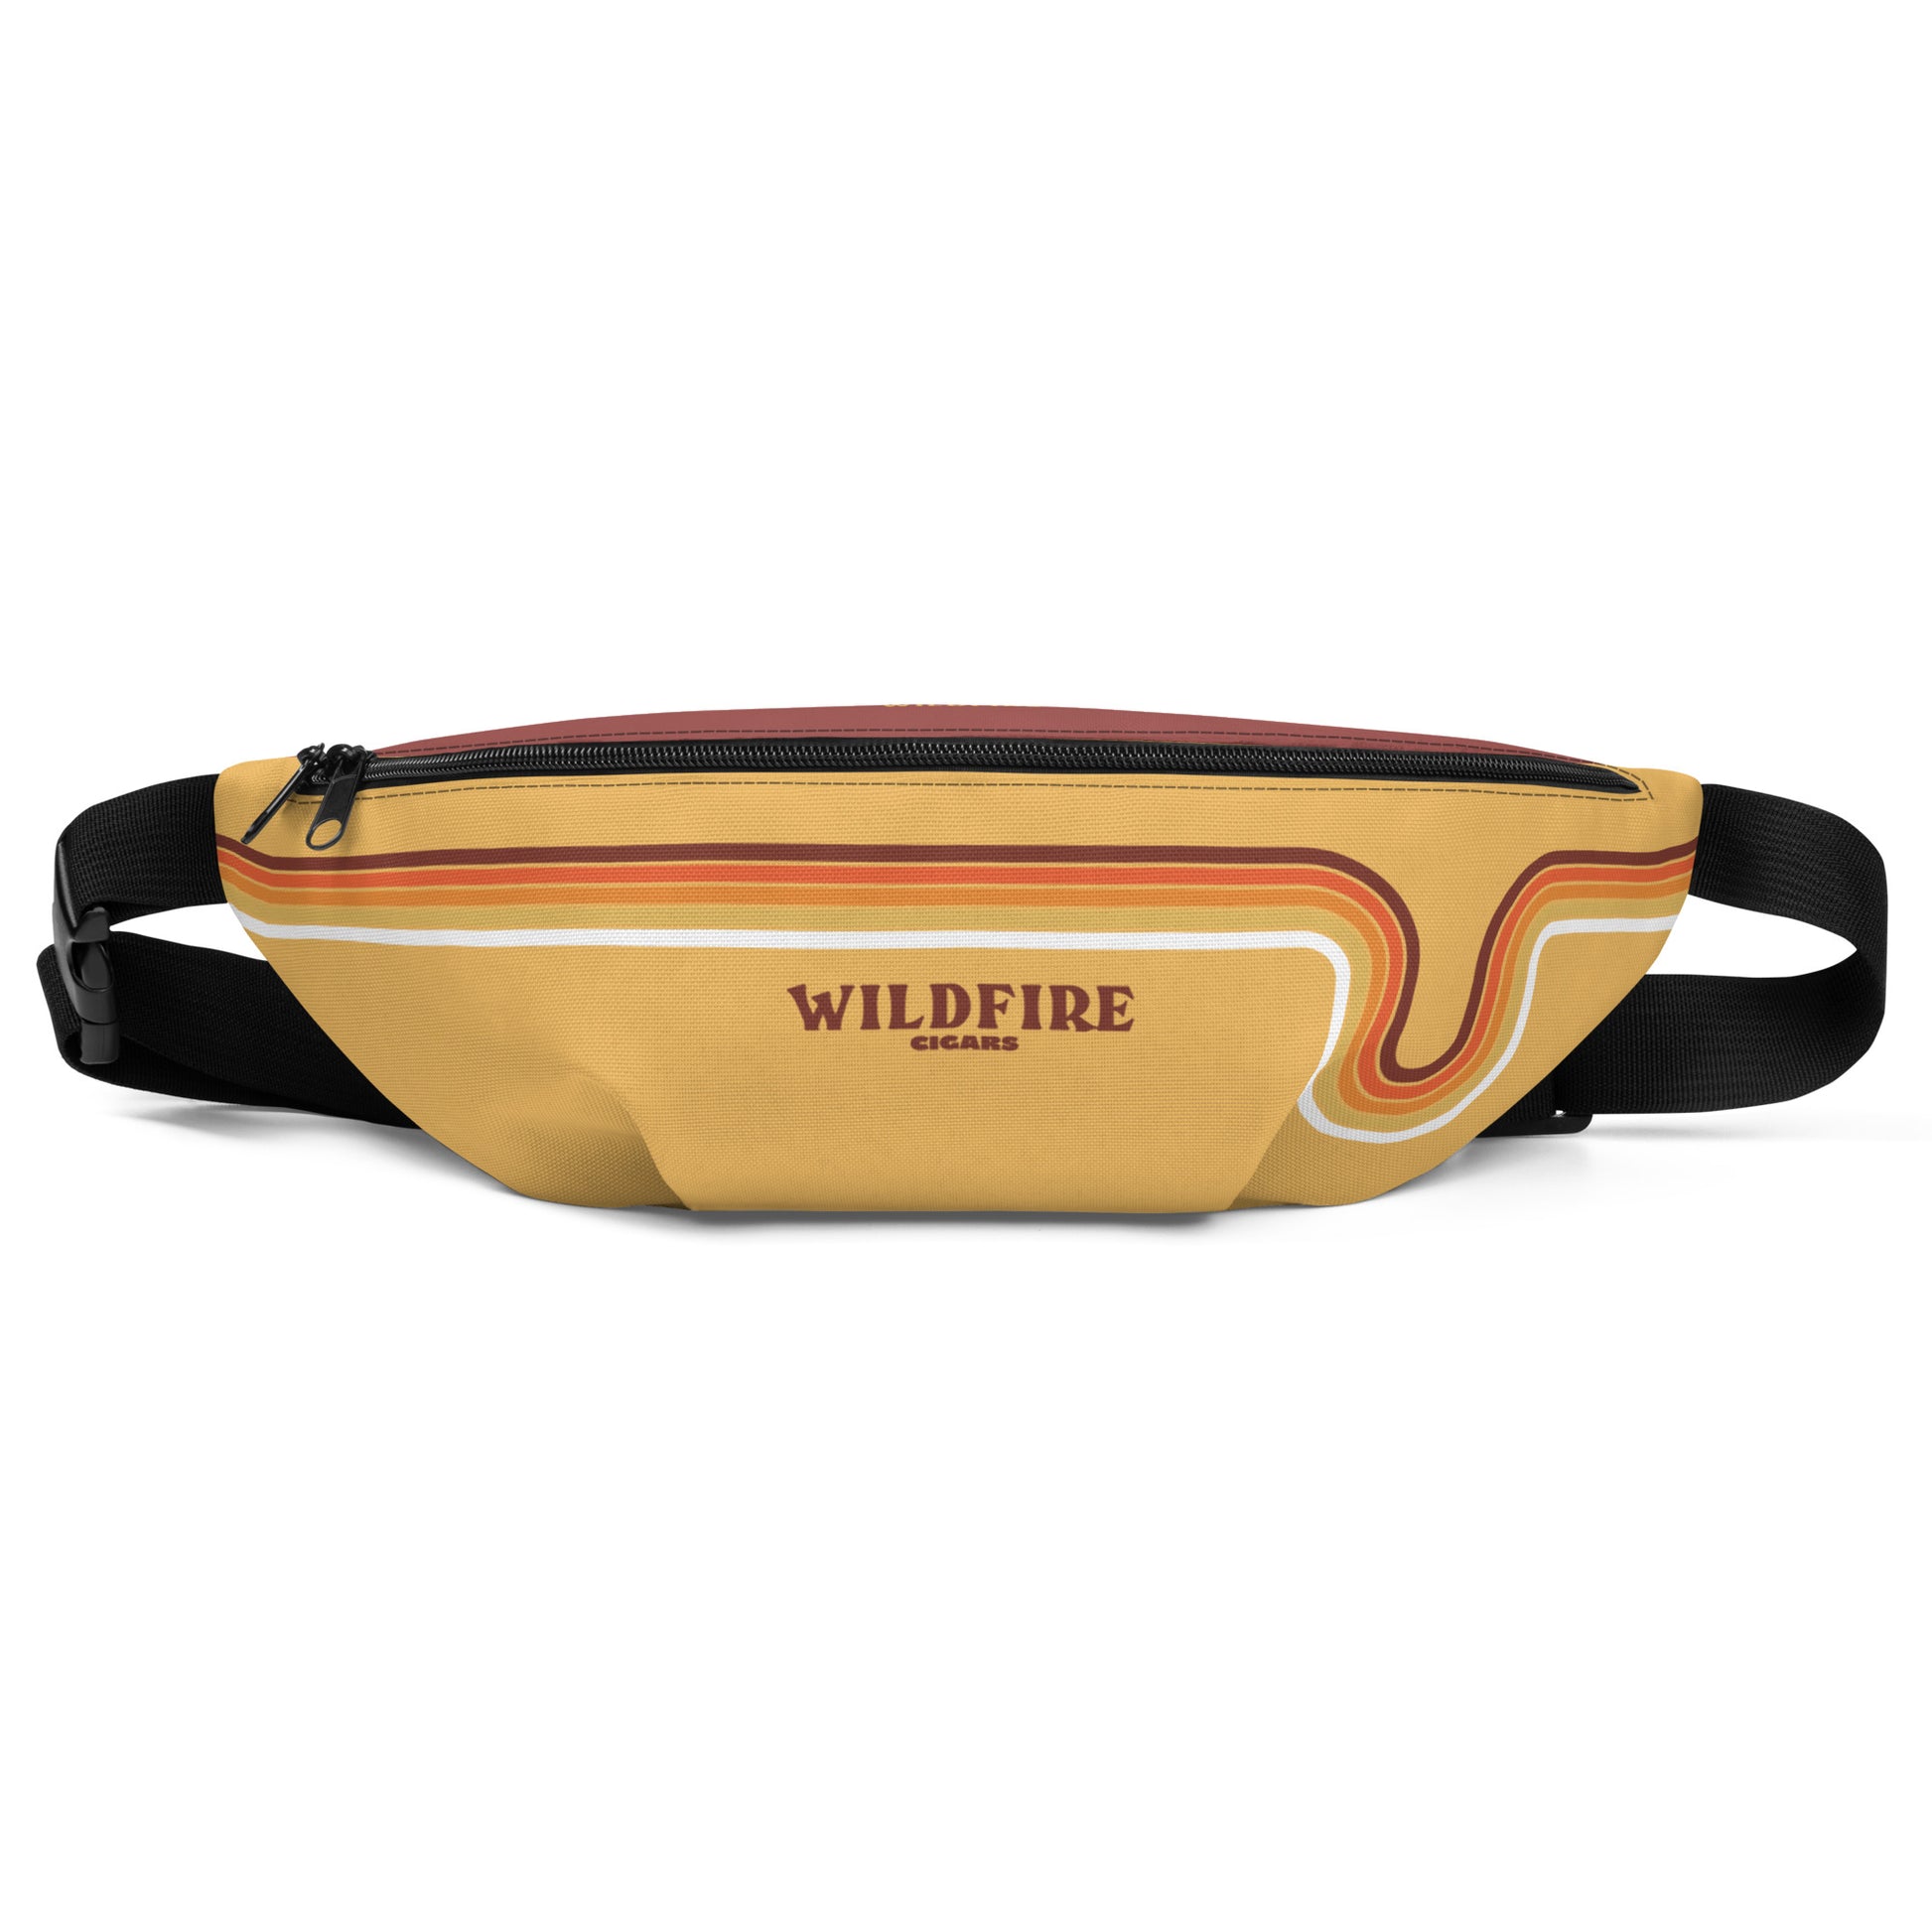 Wildfire Cigars retro camp counselor fanny pack from the front